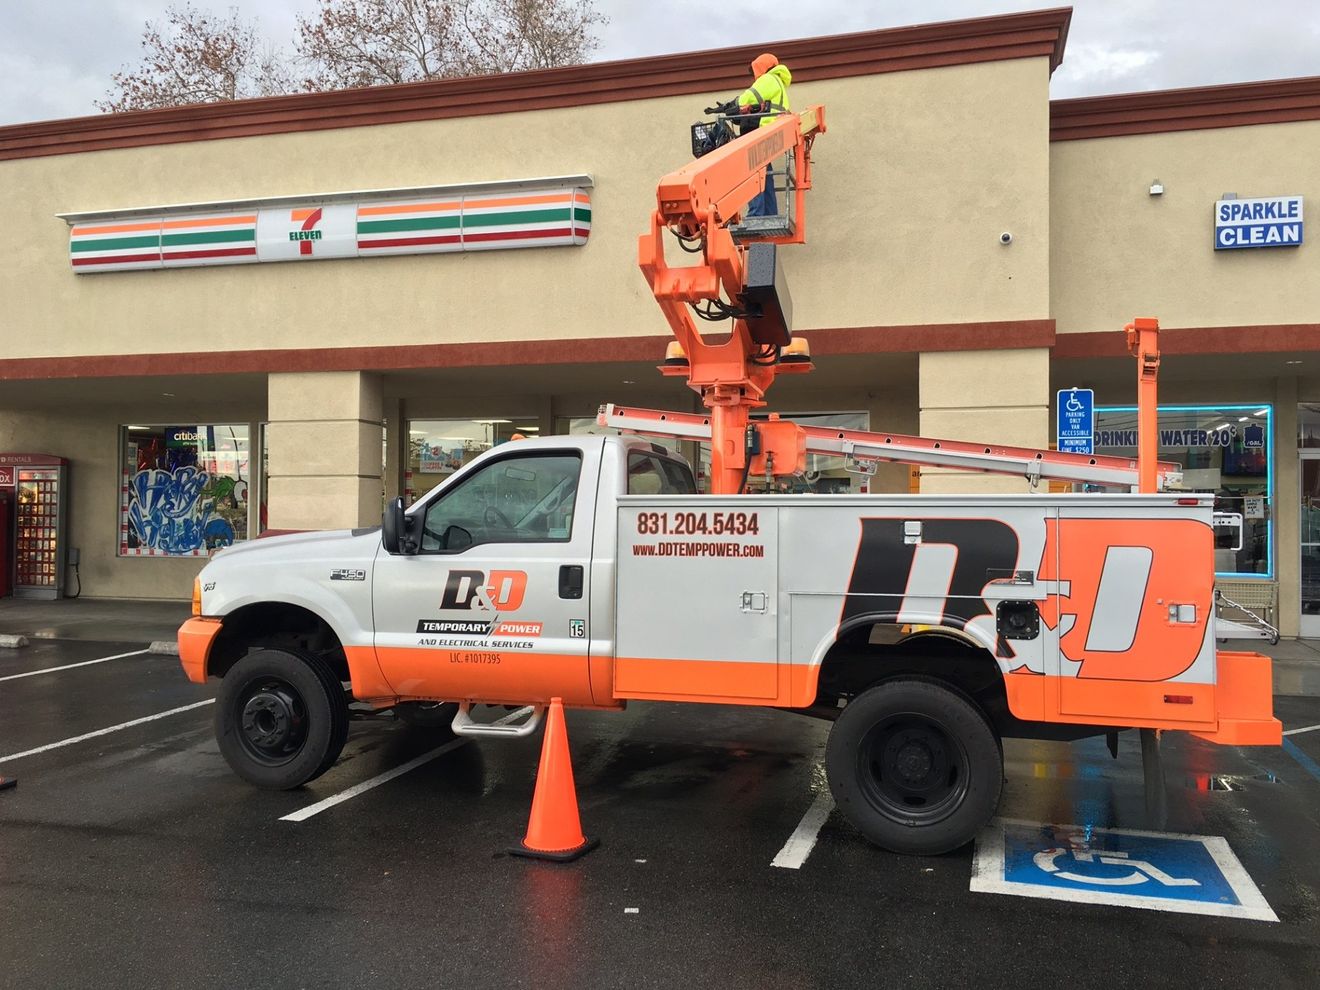 Company Services - Electrical contractor services in Salinas, CA